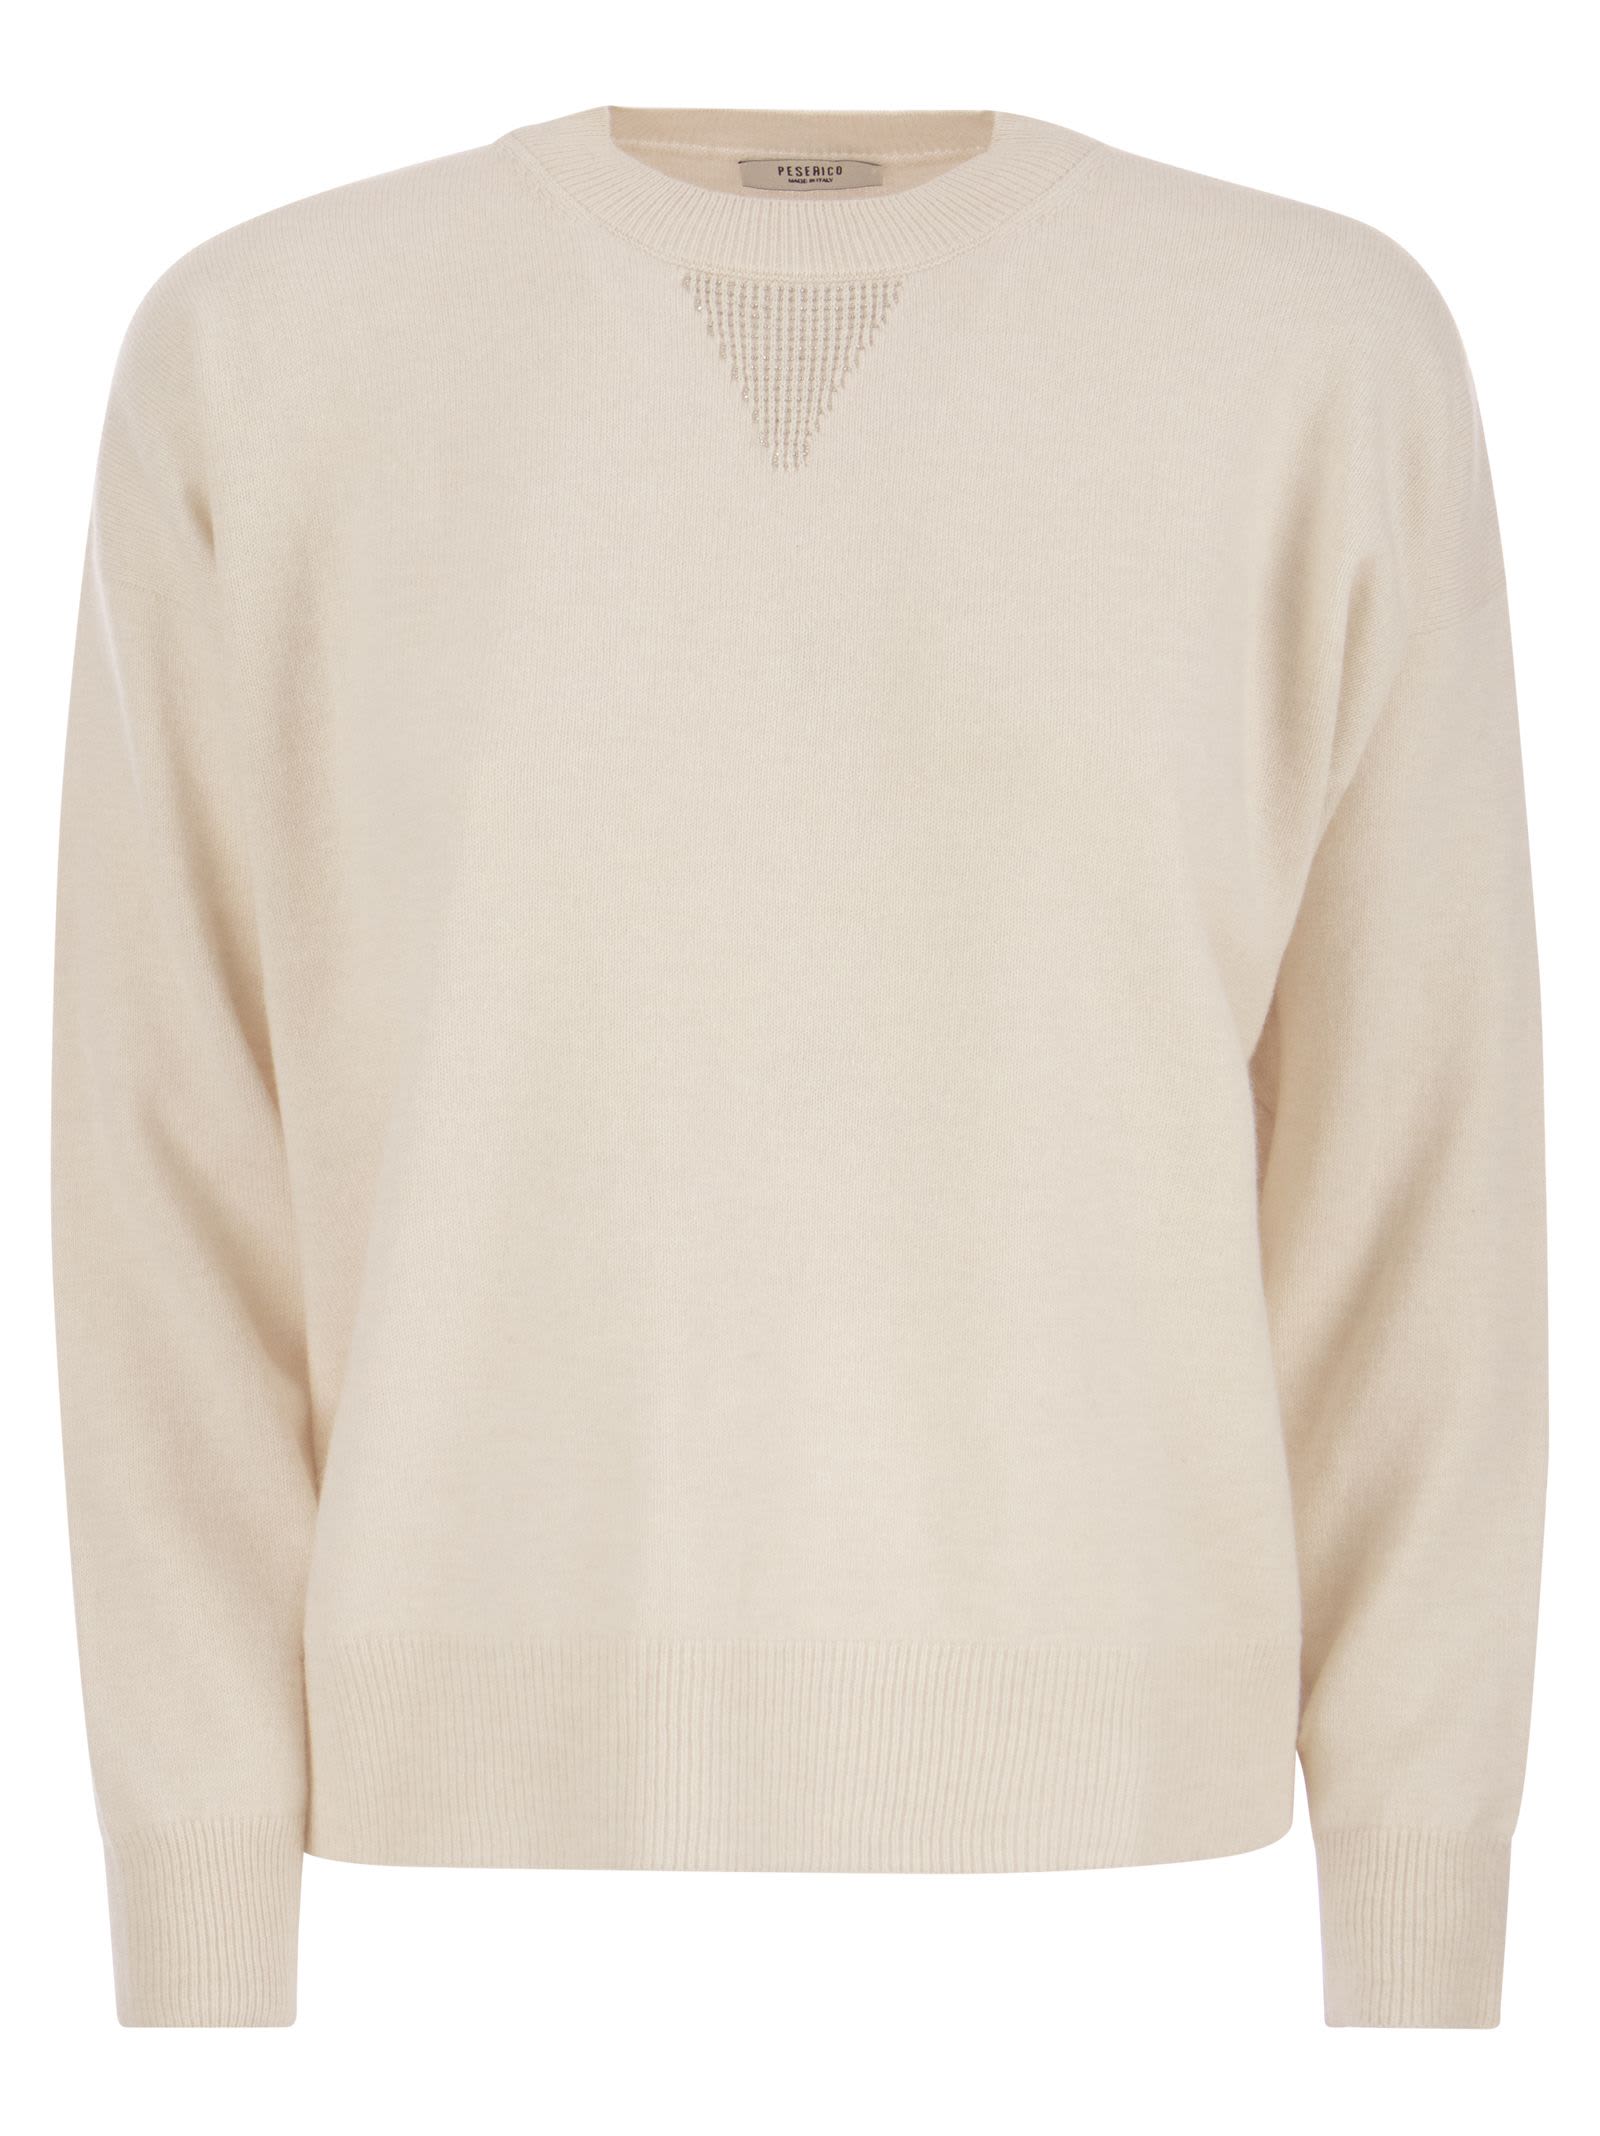 PESERICO CREW-NECK SWEATER IN WOOL, SILK AND CASHMERE BLEND